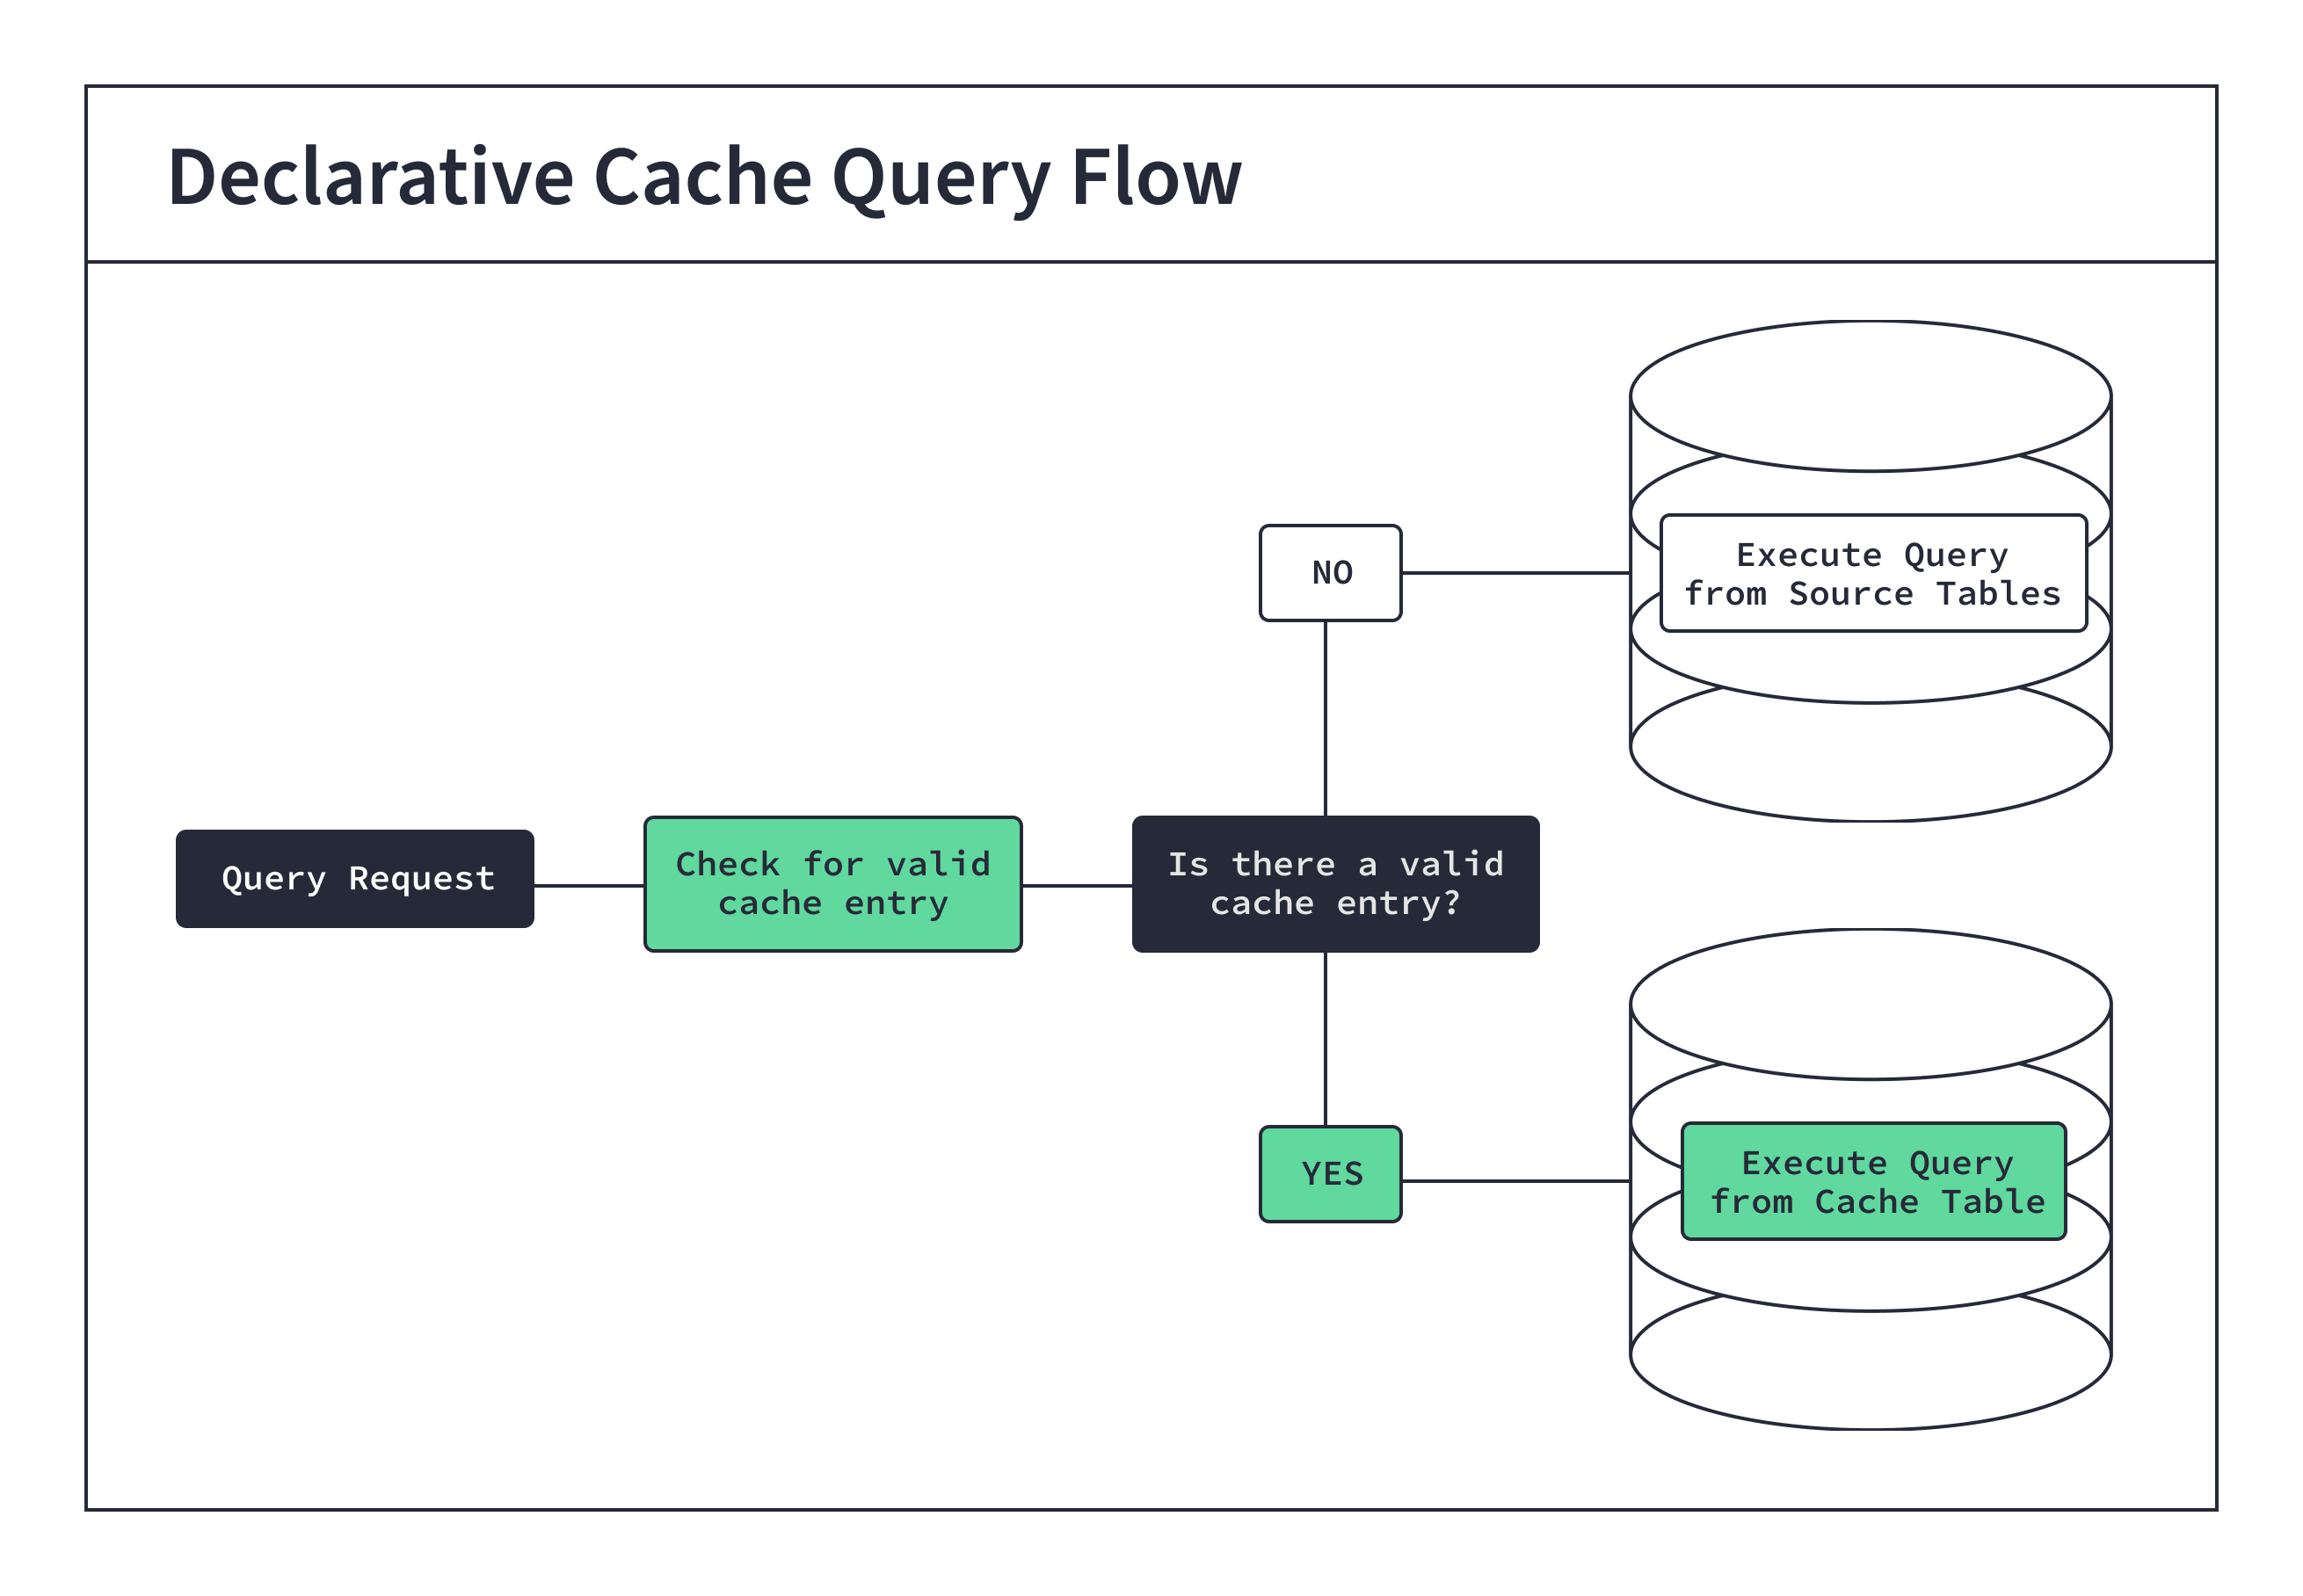 Overview of the declarative cache query flow